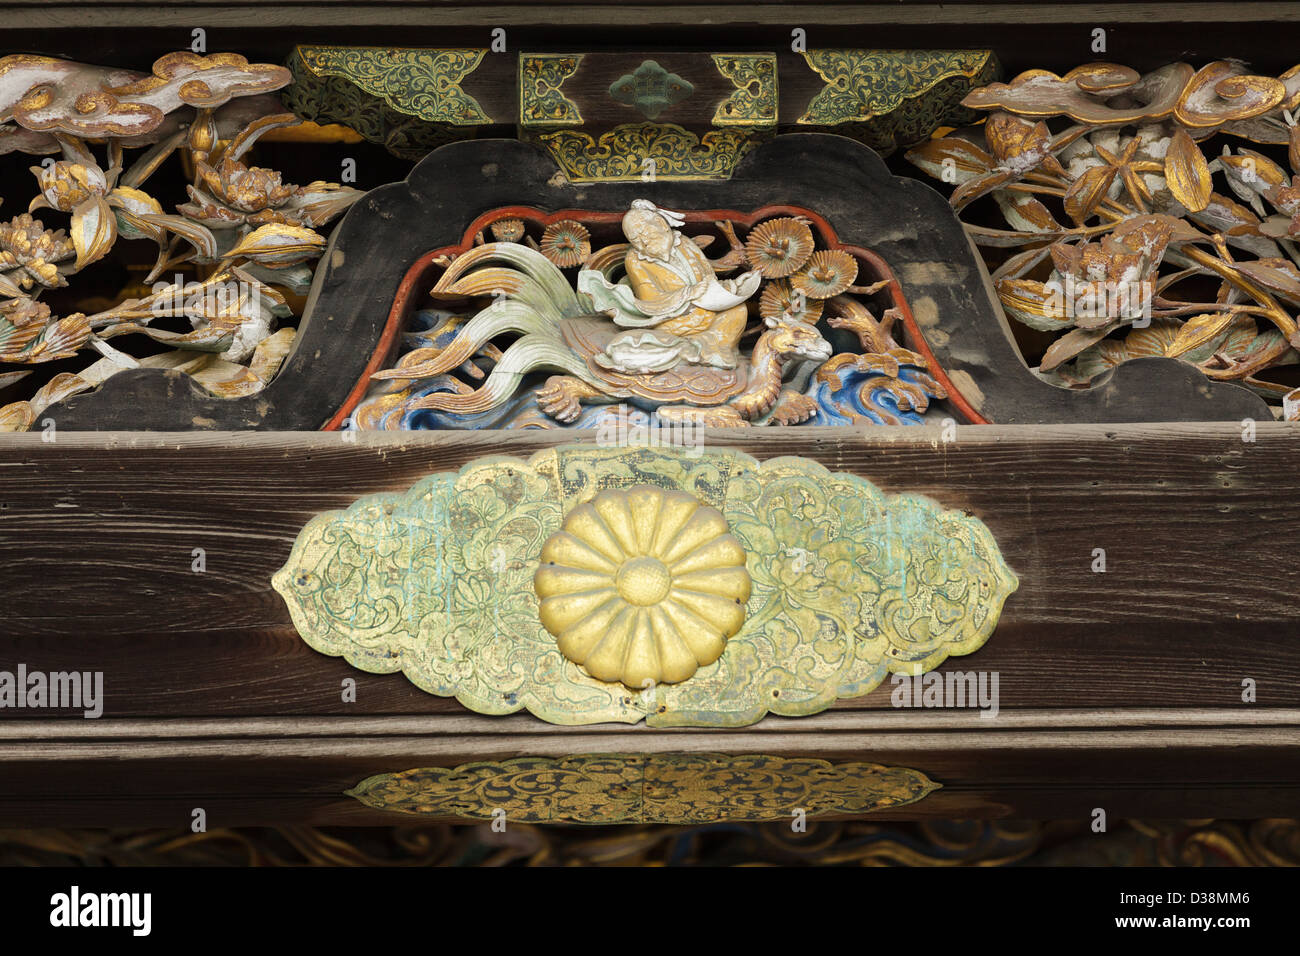 Religious wooden Carving on Ninomaru temple, Kyoto imperial palace , Japan Stock Photo